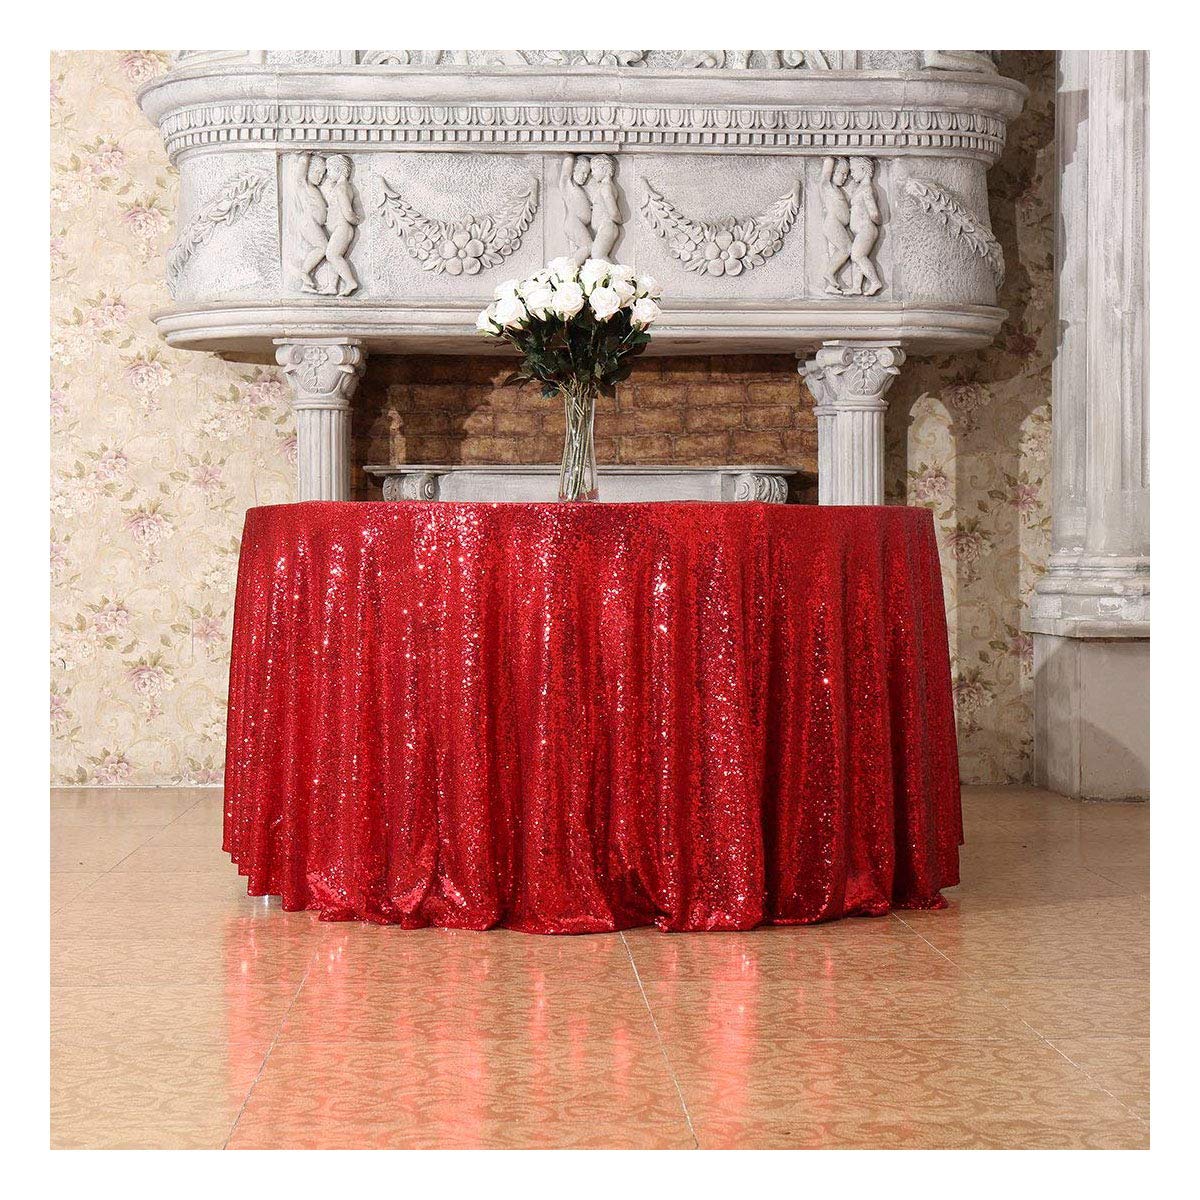 300cm Round Red - 3E Home 300cm Round Sequin TableCloth for Party Cake Dessert Table Exhibition Events Red